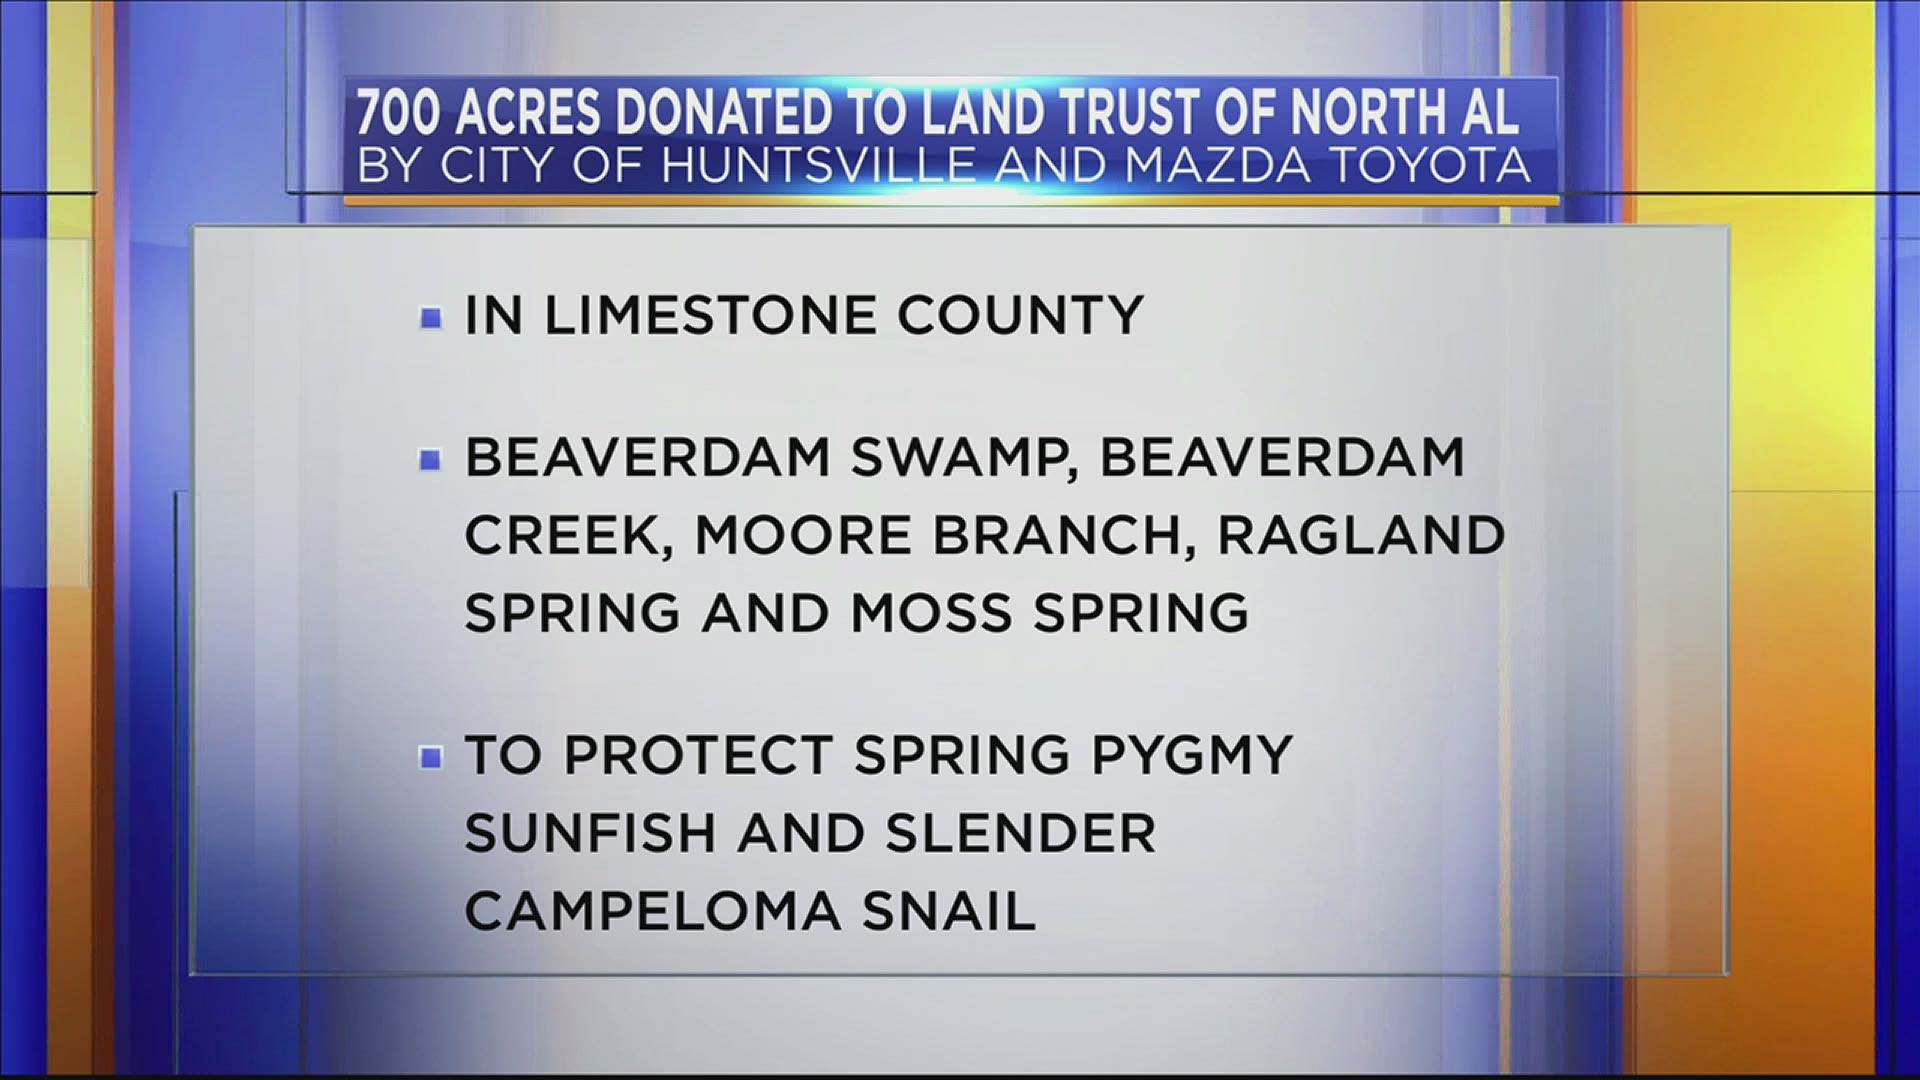 The land in Limestone County includes Beaverdam Swamp, Beaverdam Creek, Moore Branch, Ragland Spring and Moss Spring.